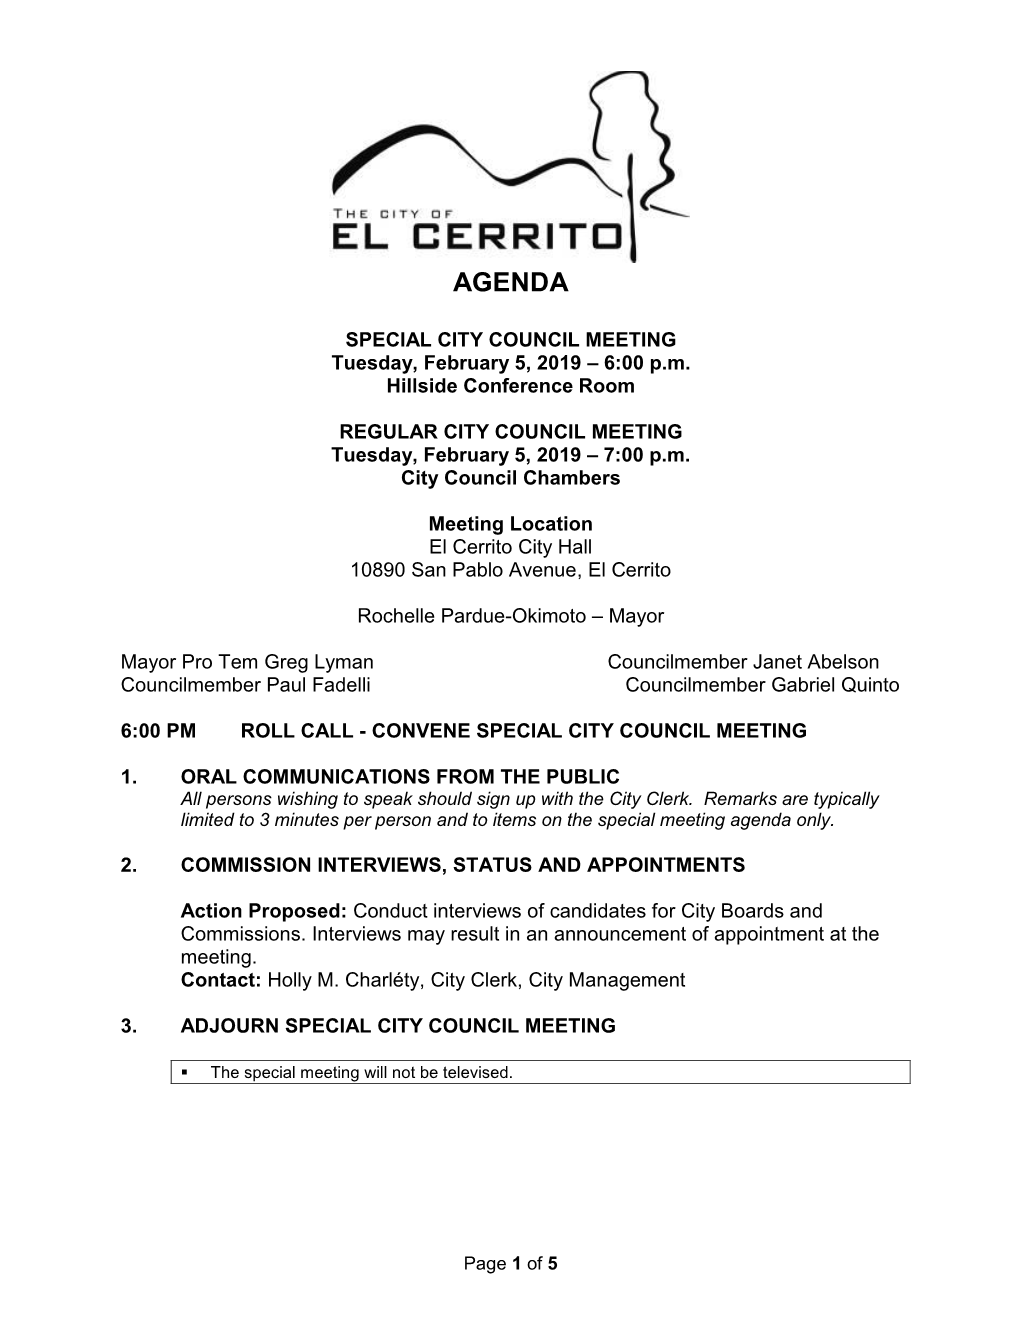 SPECIAL CITY COUNCIL MEETING Tuesday, February 5, 2019 – 6:00 P.M